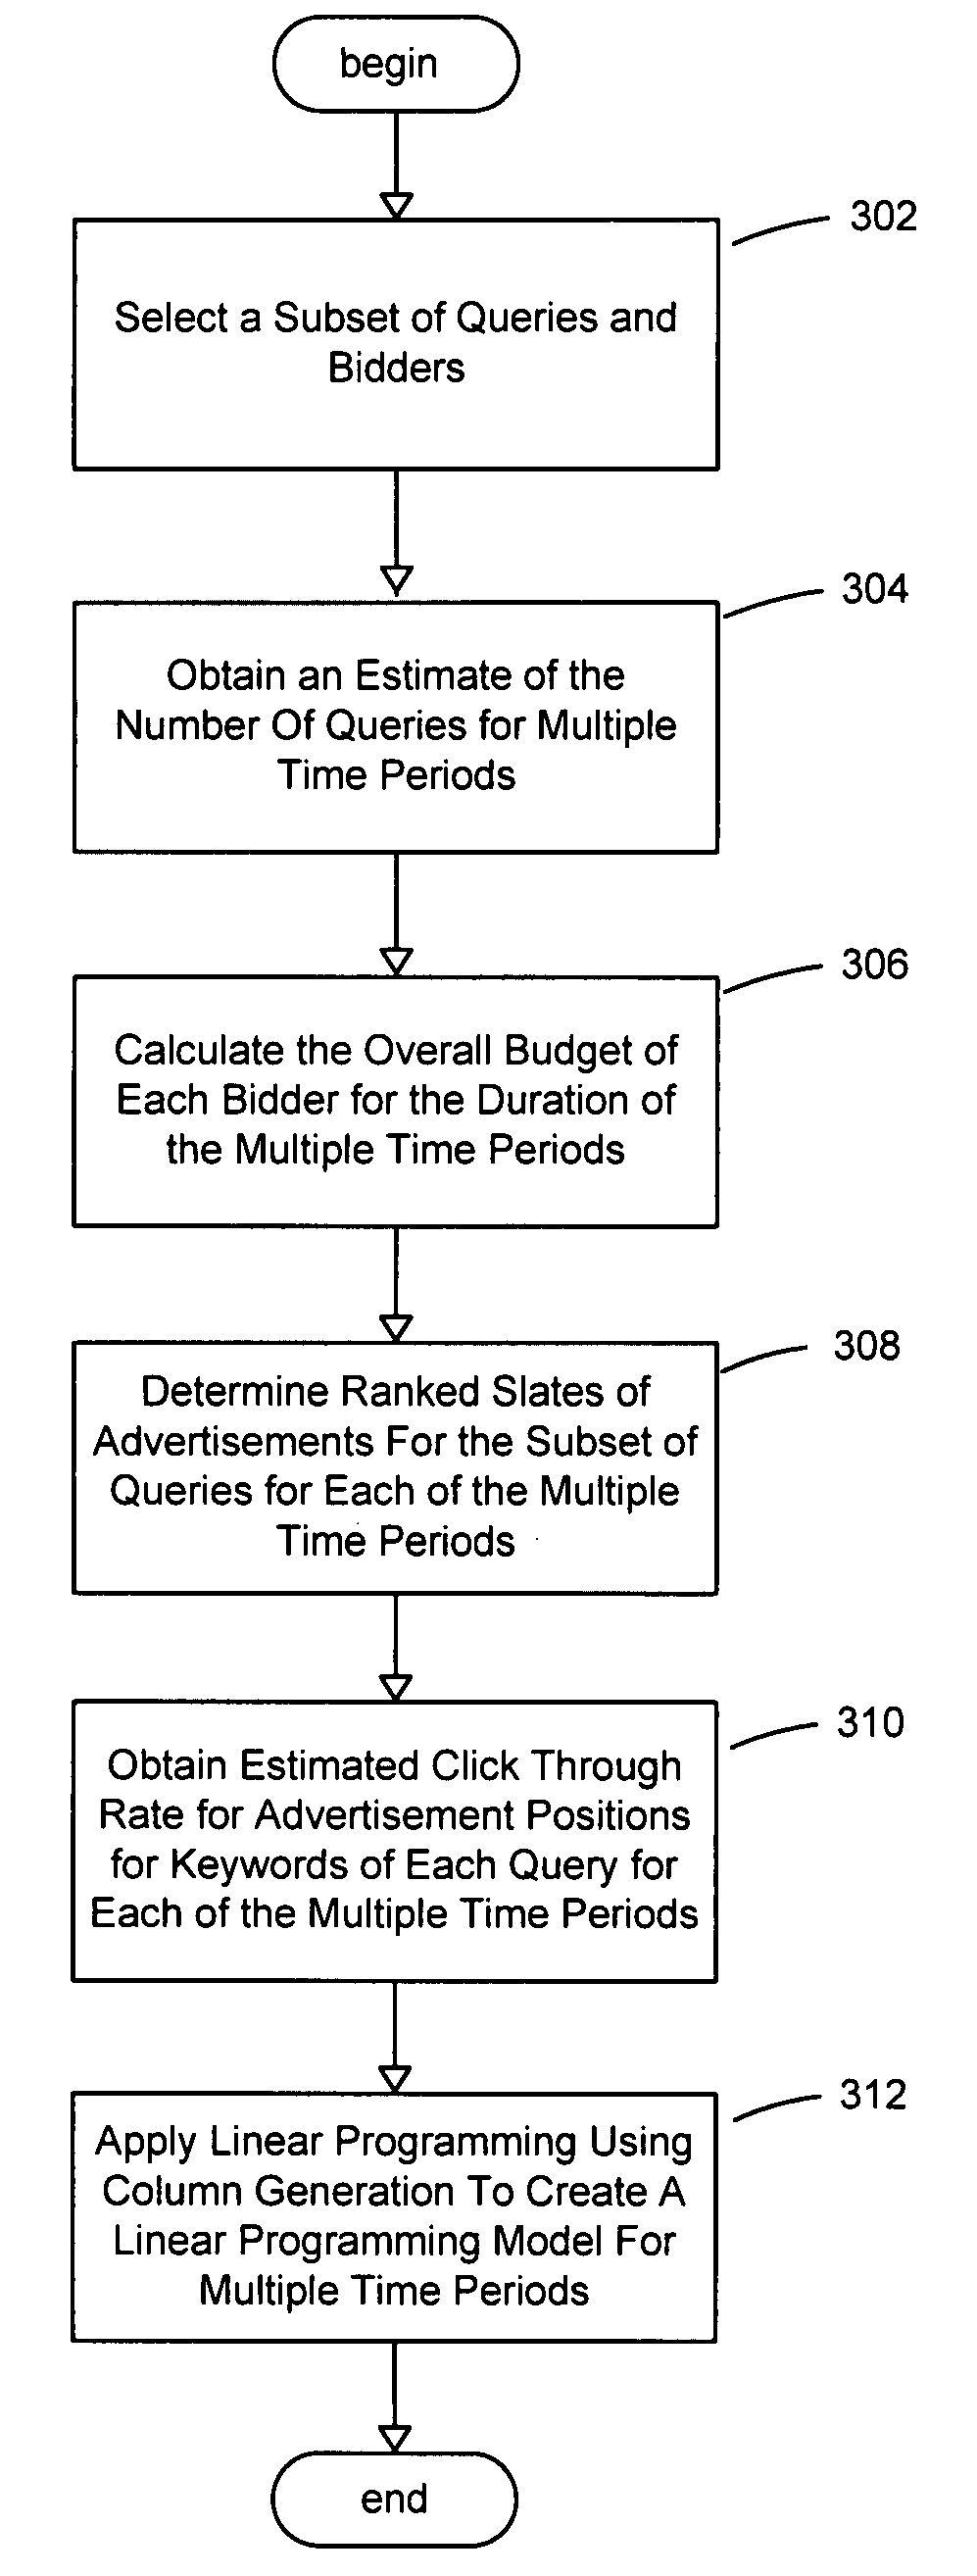 System and method for scheduling online keyword auctions over multiple time periods subject to budget and query volume constraints